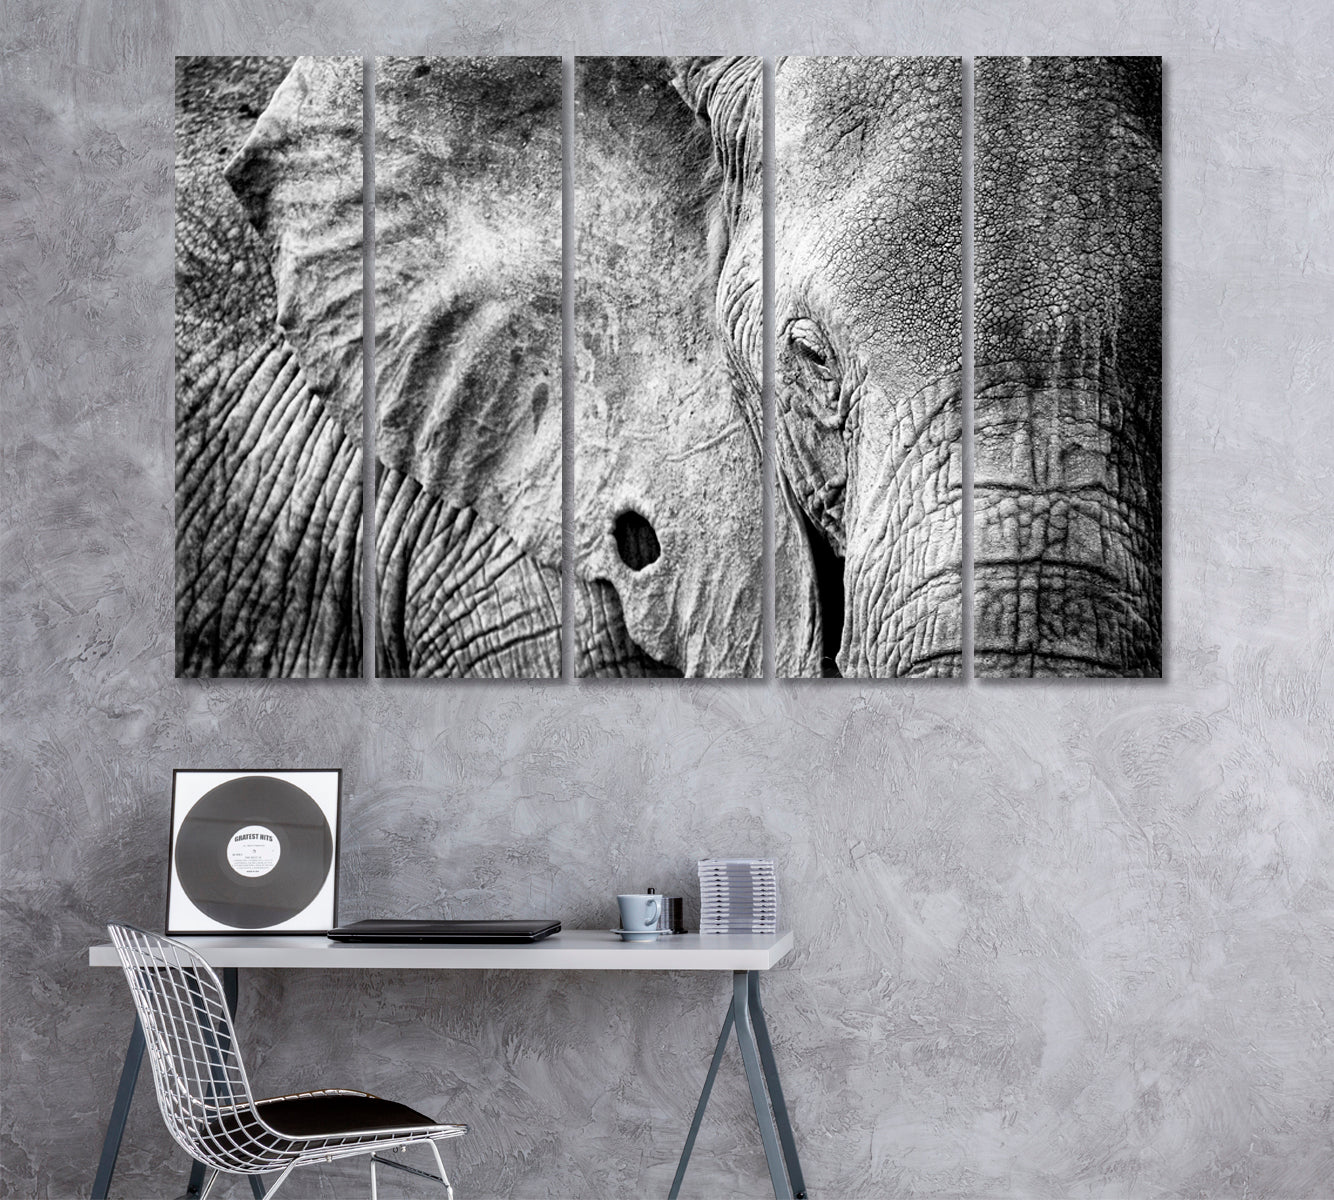 African Elephant in Black and White Canvas Print ArtLexy 5 Panels 36"x24" inches 